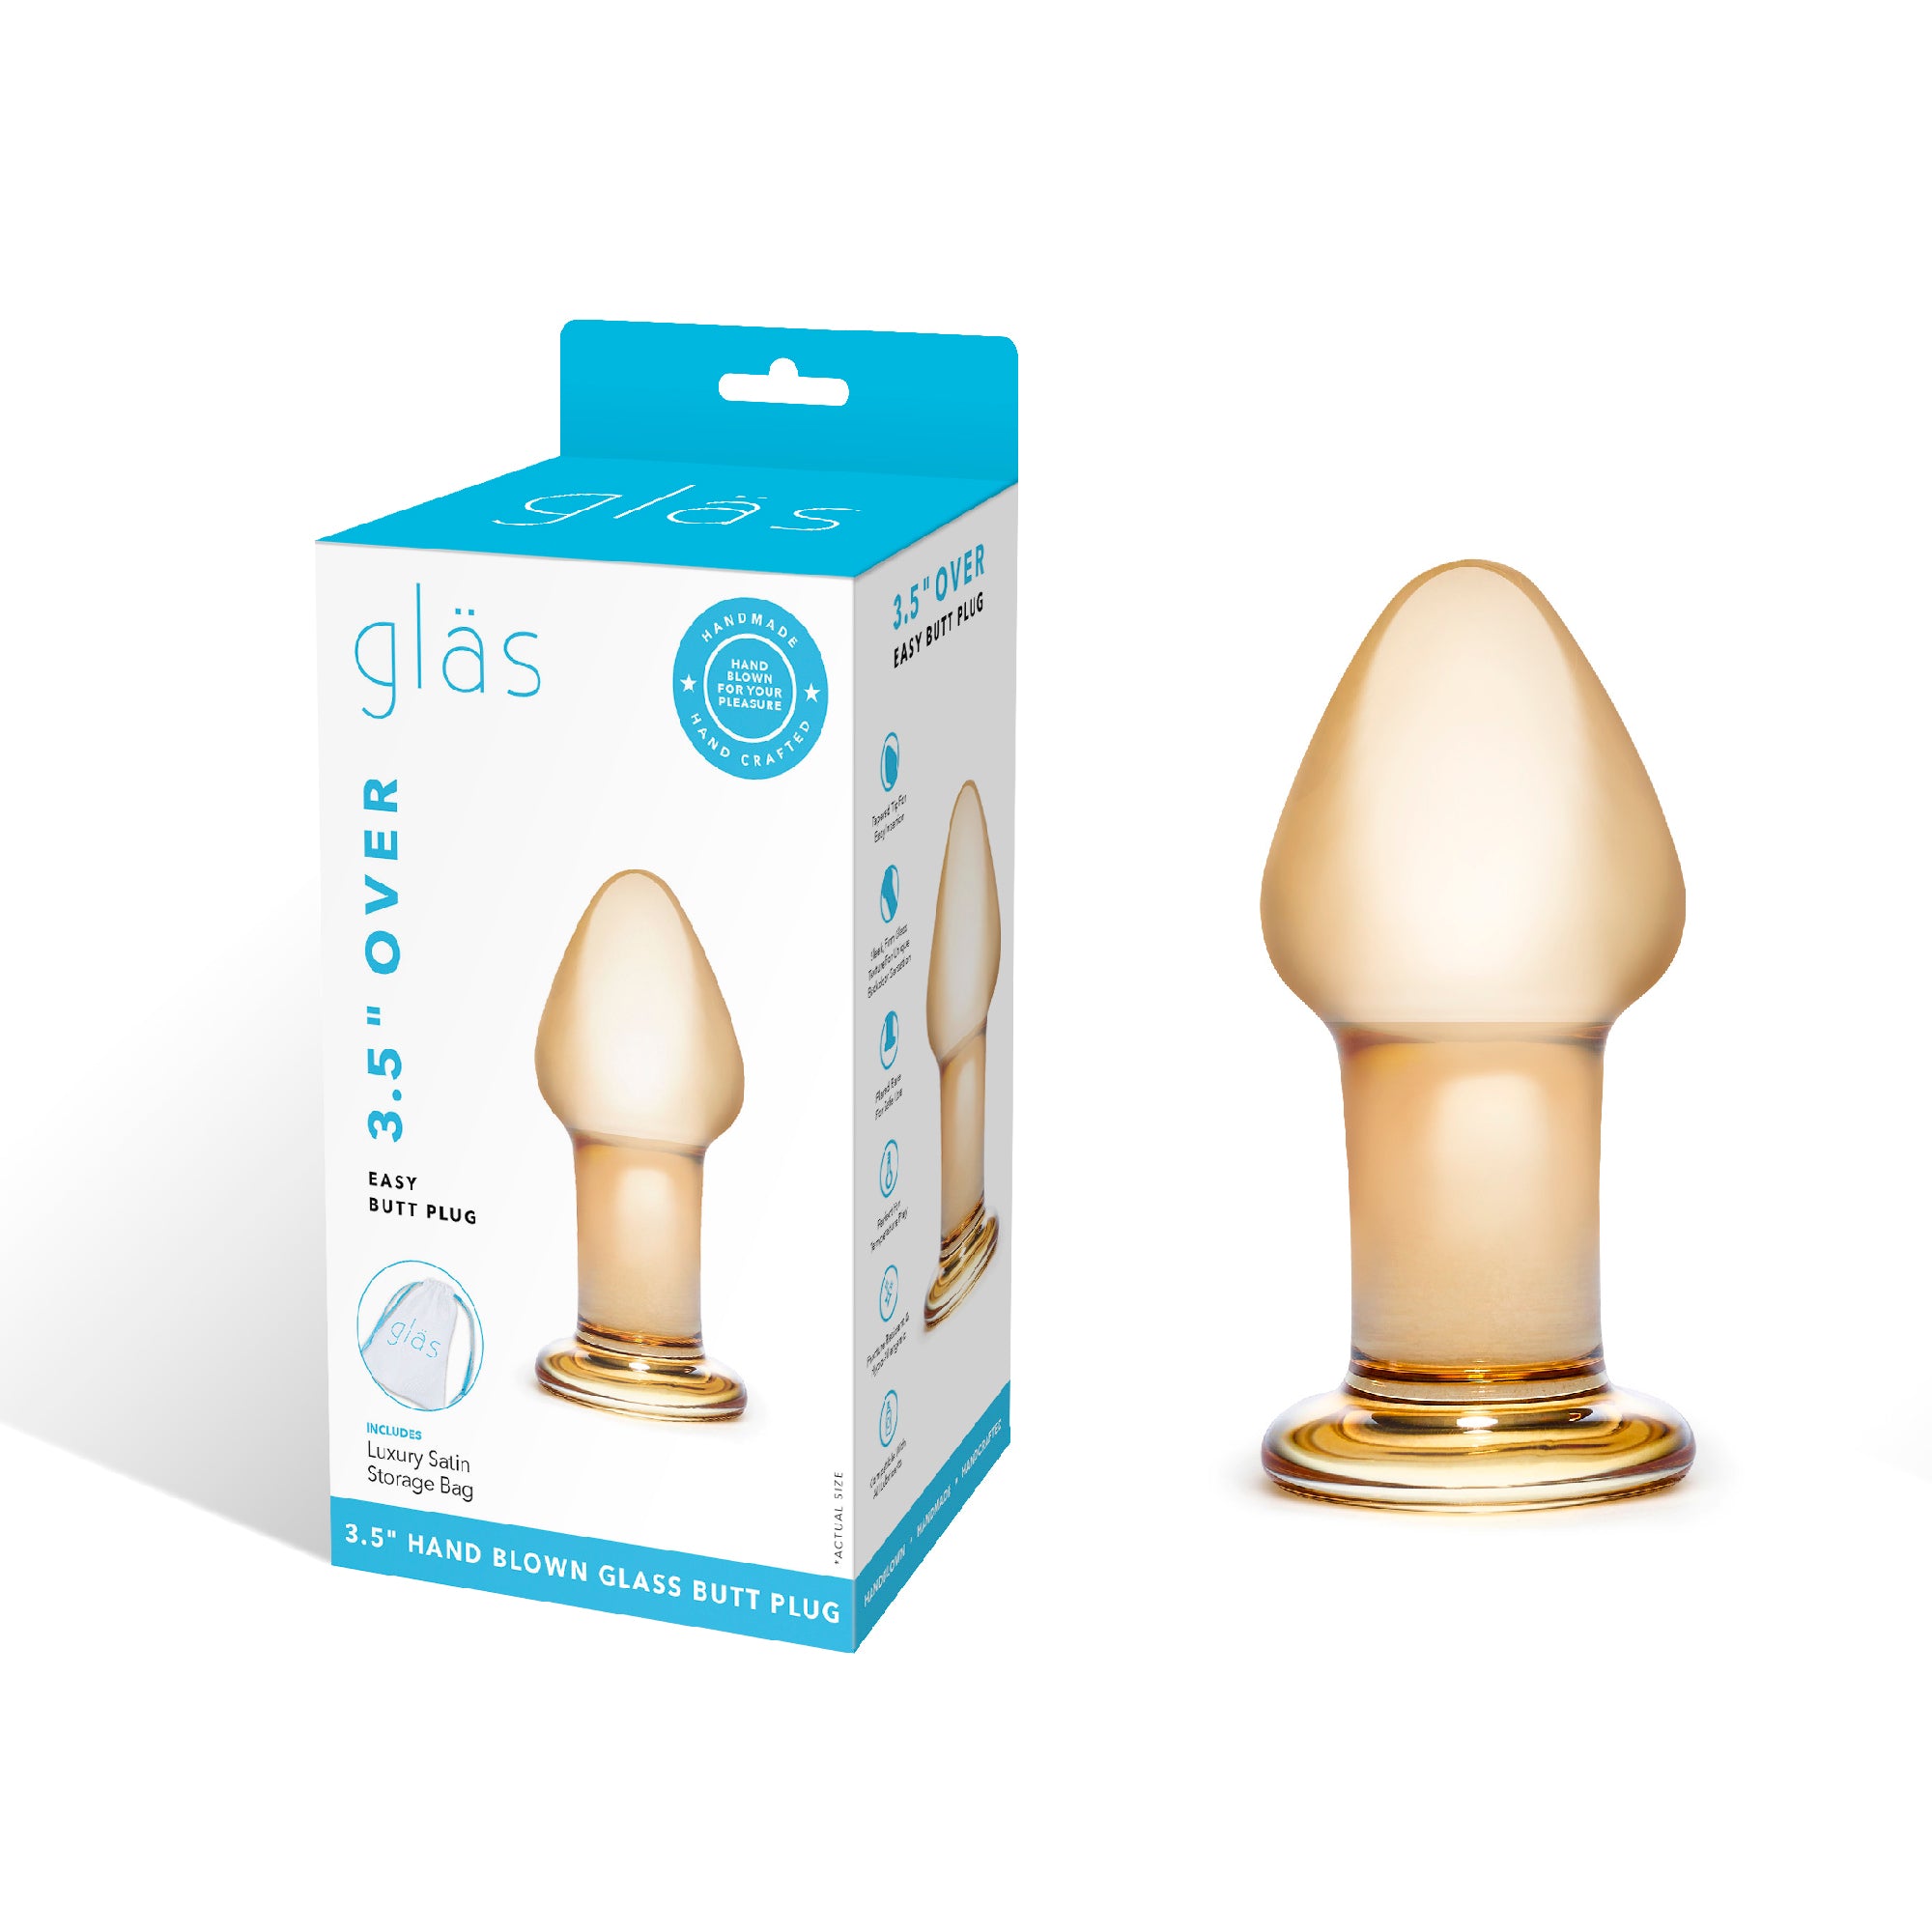 Packaging of the Gläs Over Easy Glass Butt Plug